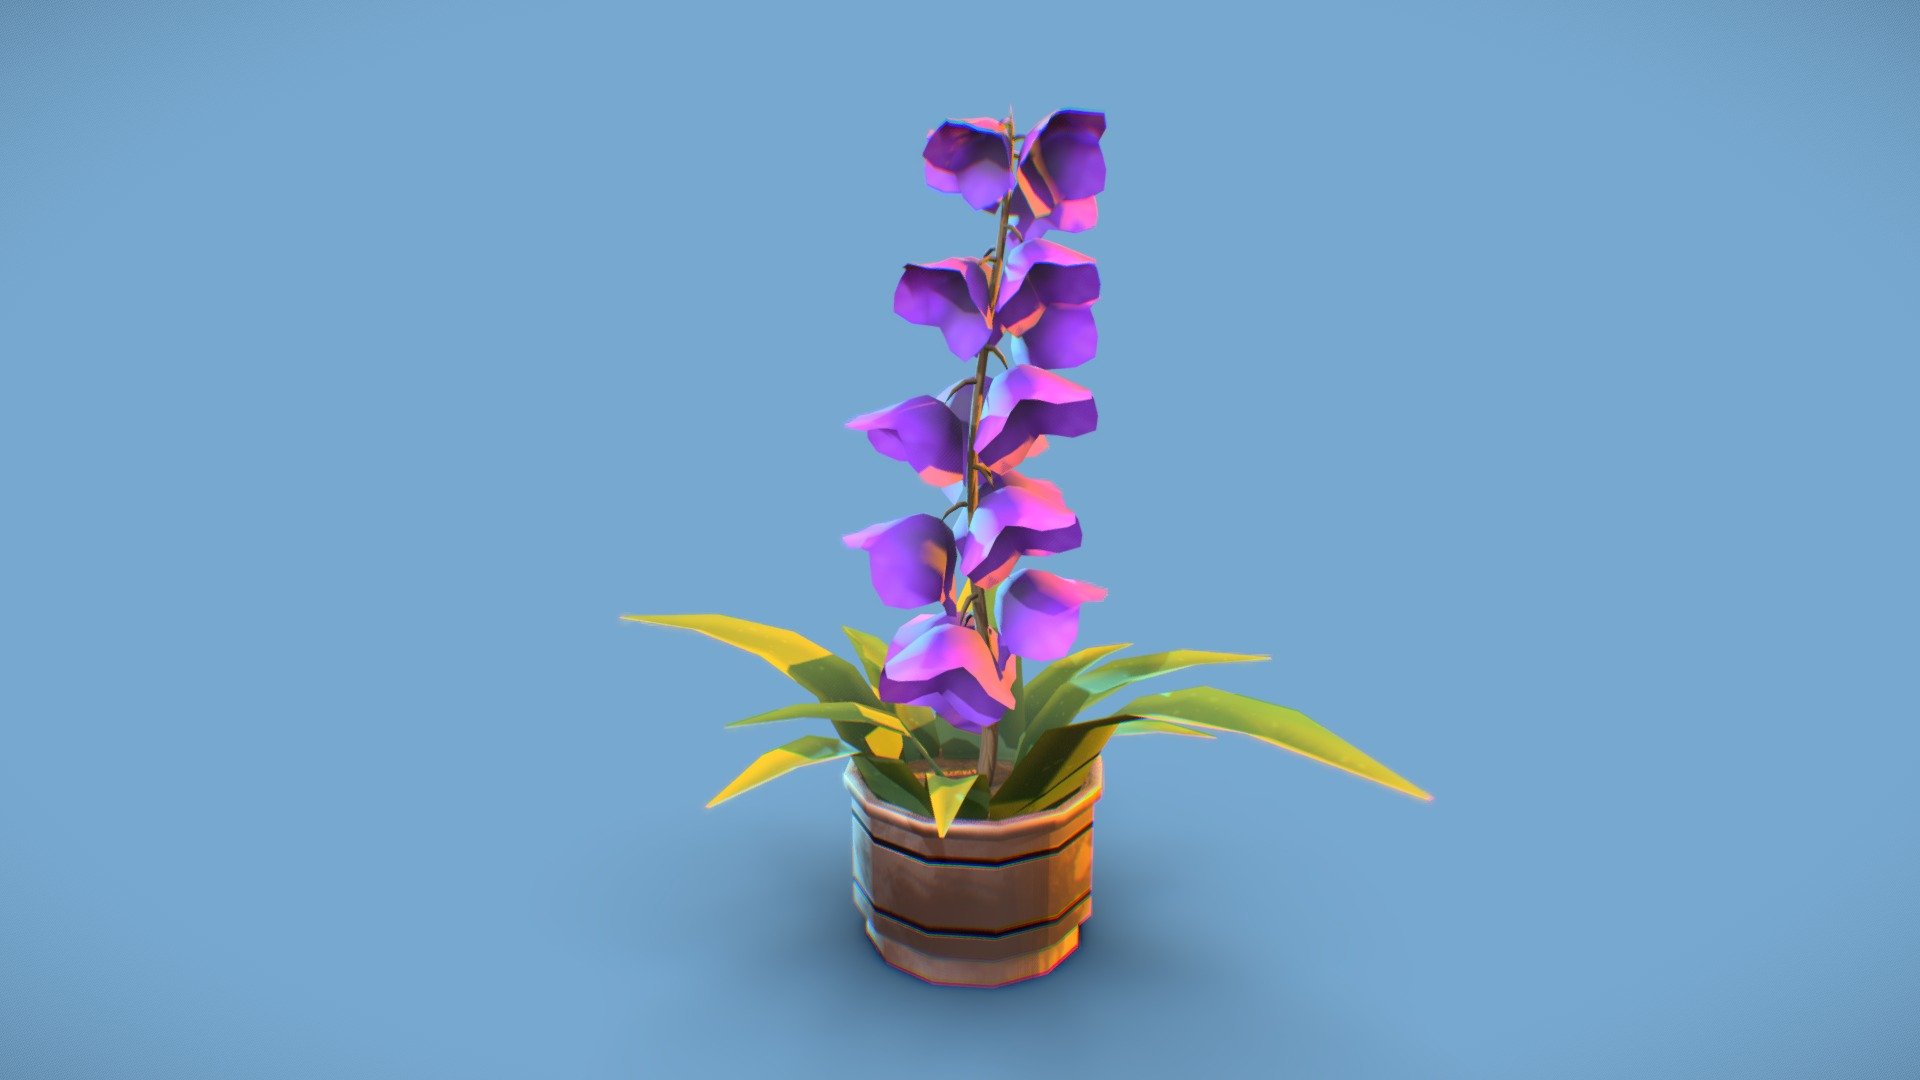 Low Poly Stylized Plant for your renders and games

Textures:

Diffuse color, Roughness, Metallic, Normal

All textures are 2K

Files Formats:

Blend

Fbx

Obj - Stylized Plant - Buy Royalty Free 3D model by Vanessa Araújo (@vanessa3d) 3d model